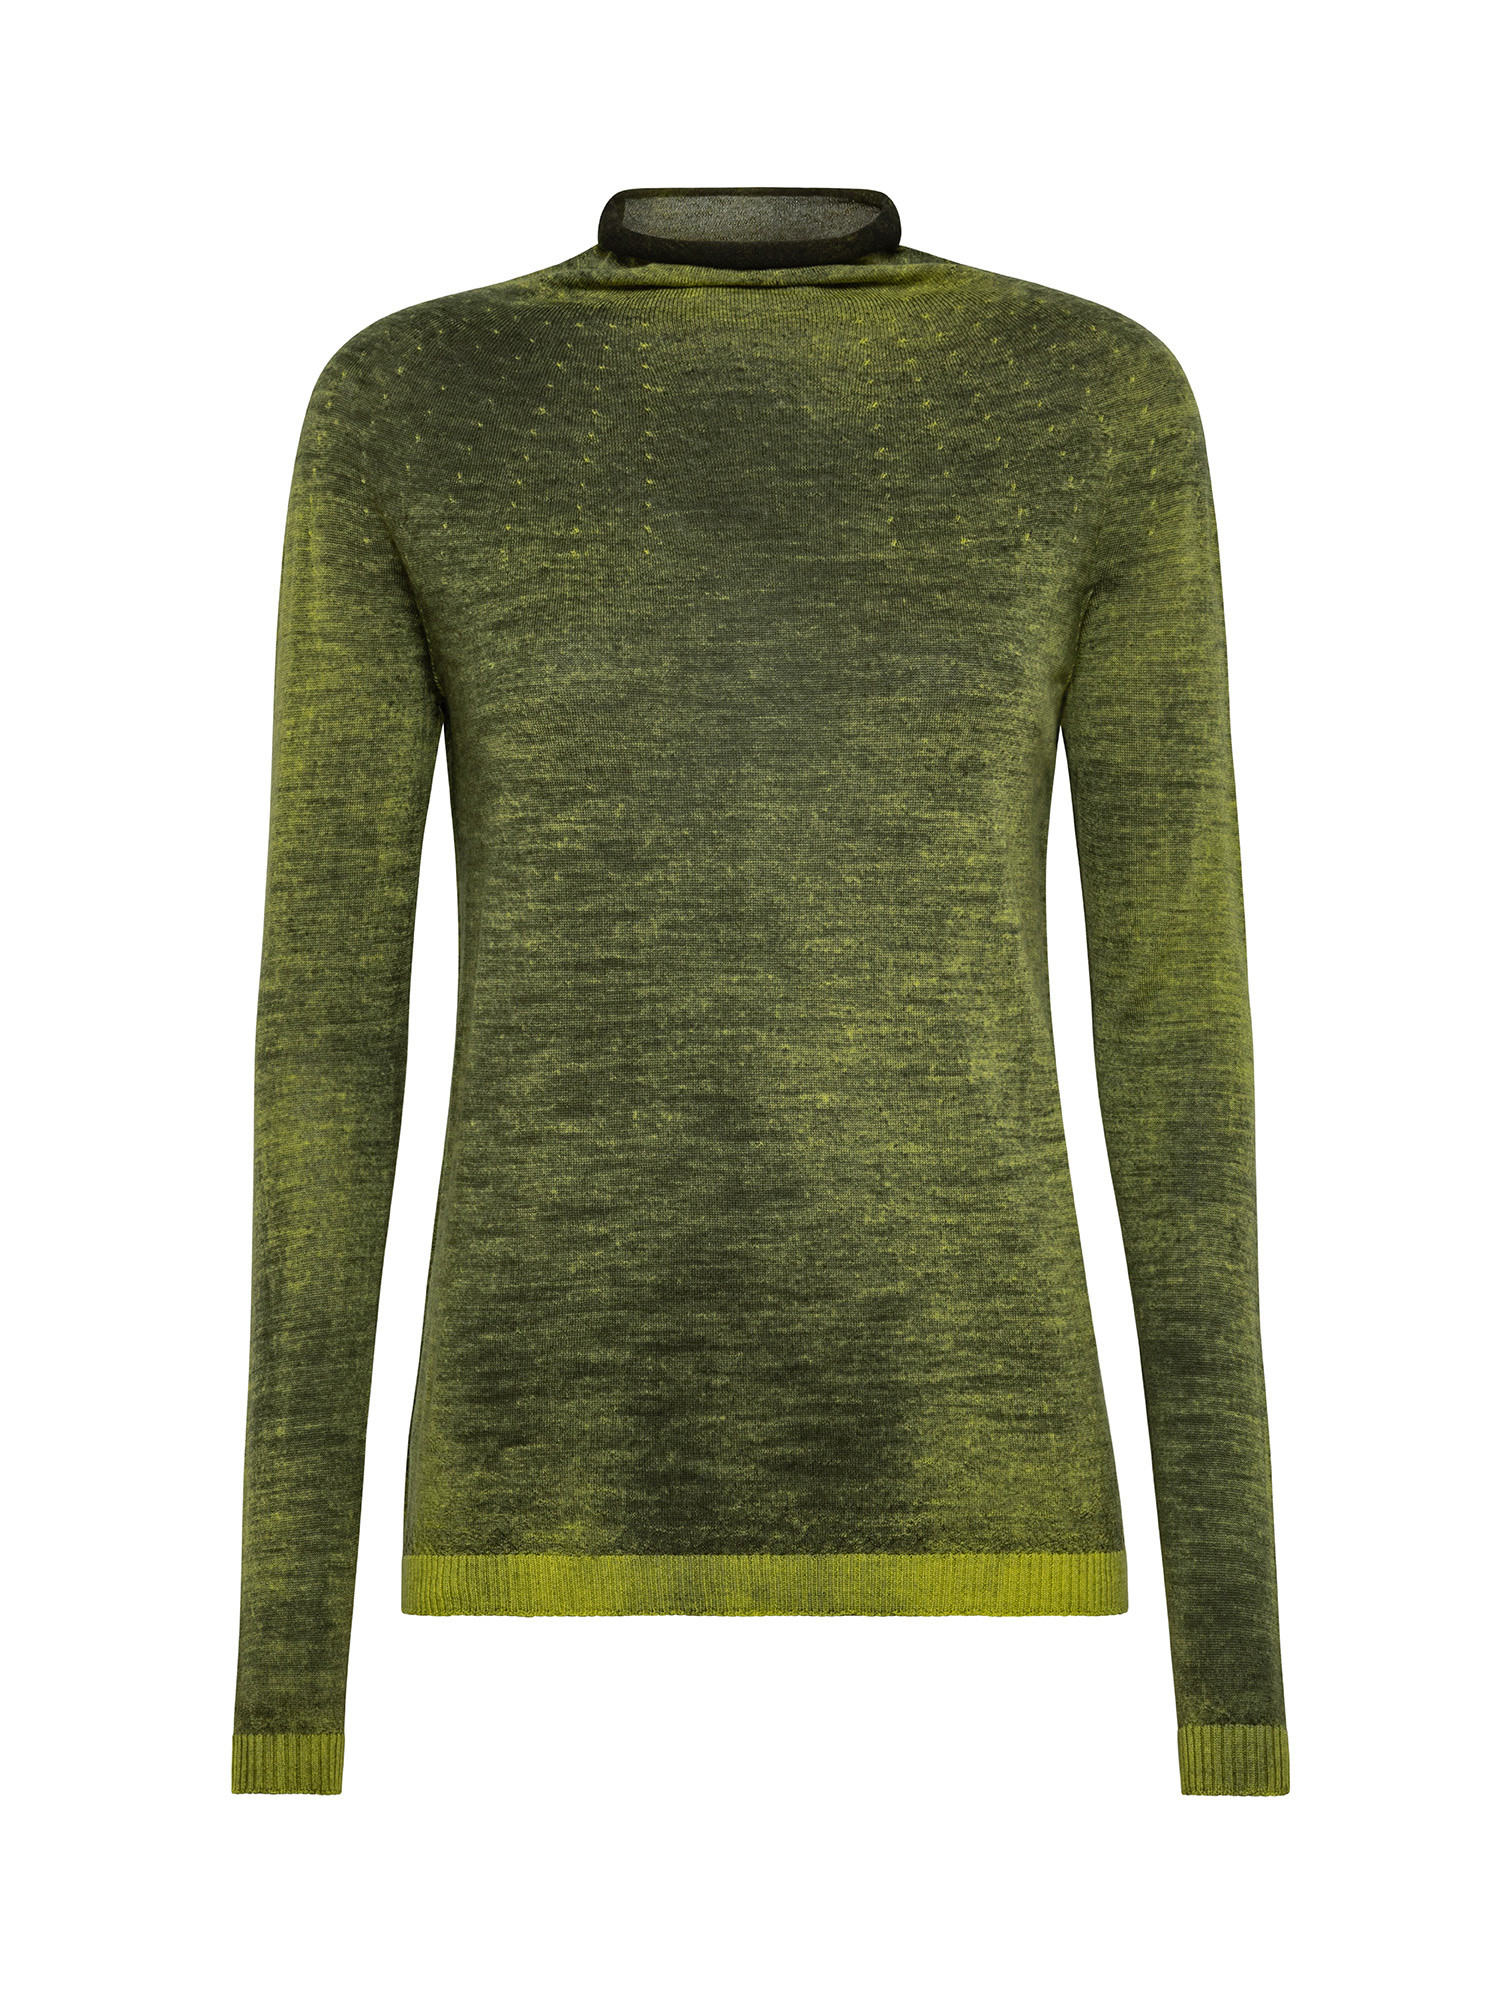 K Collection - Extra fine wool sweater, Green, large image number 0